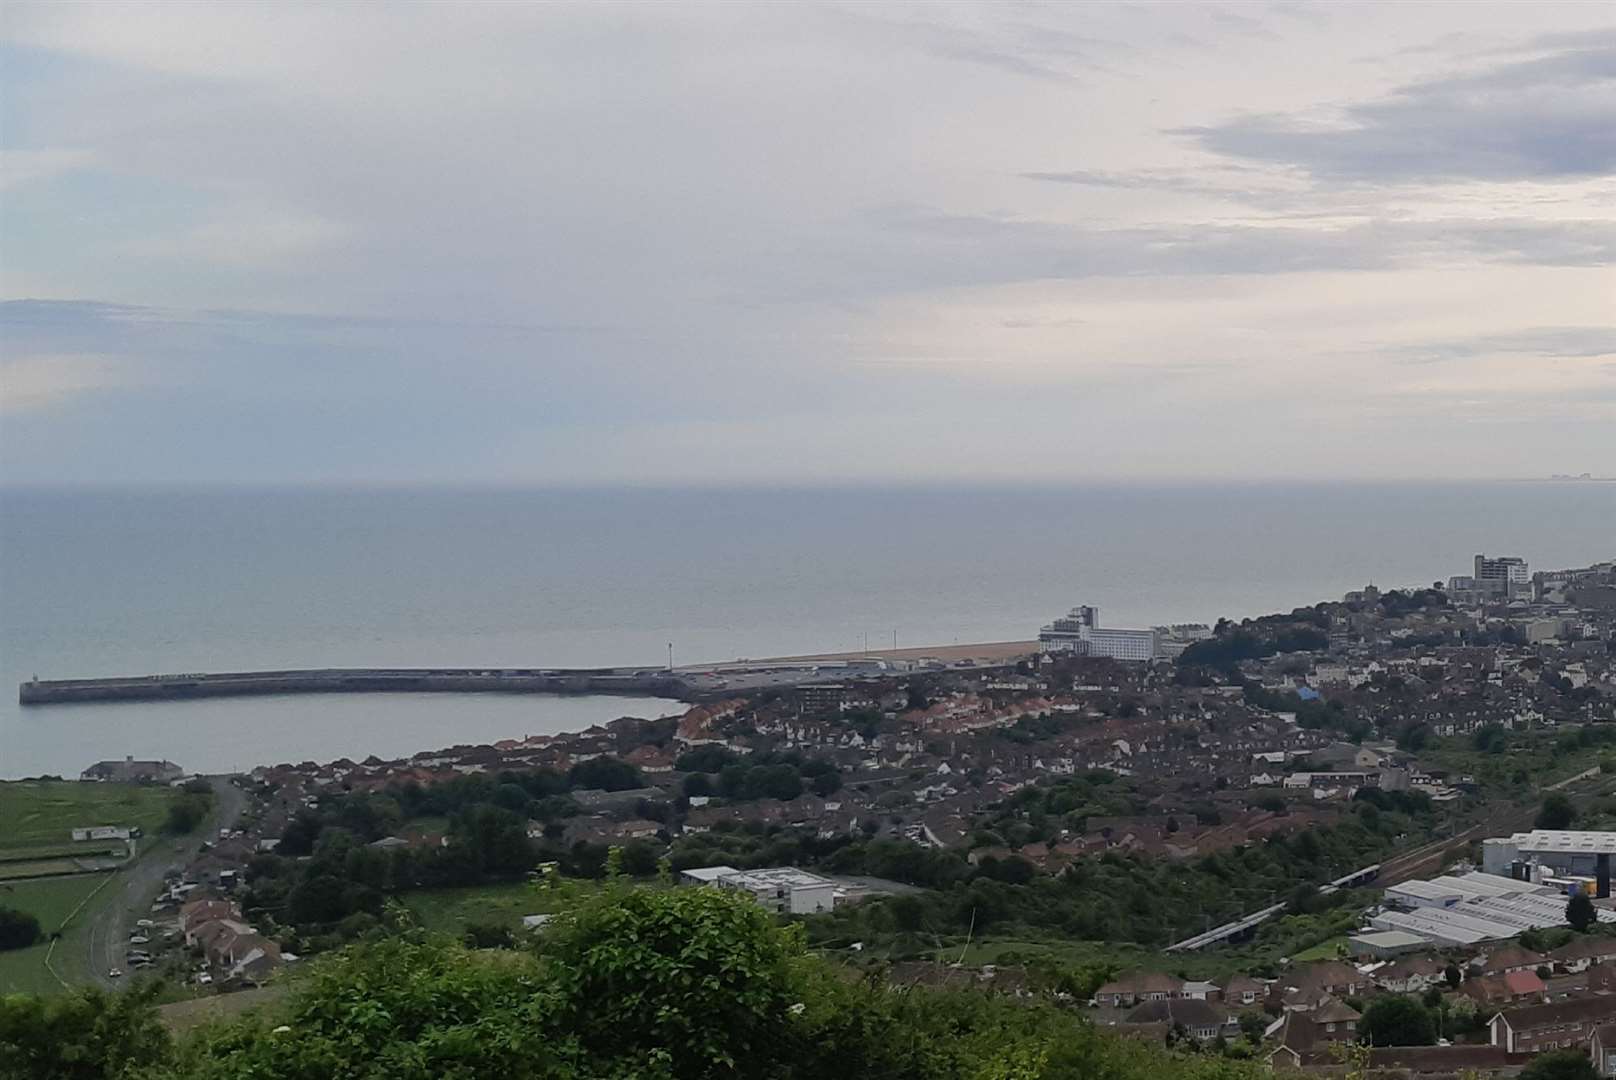 Low-lying land and roads along the coast in Folkestone could be hit by flooding. Picture: Sam Lennon